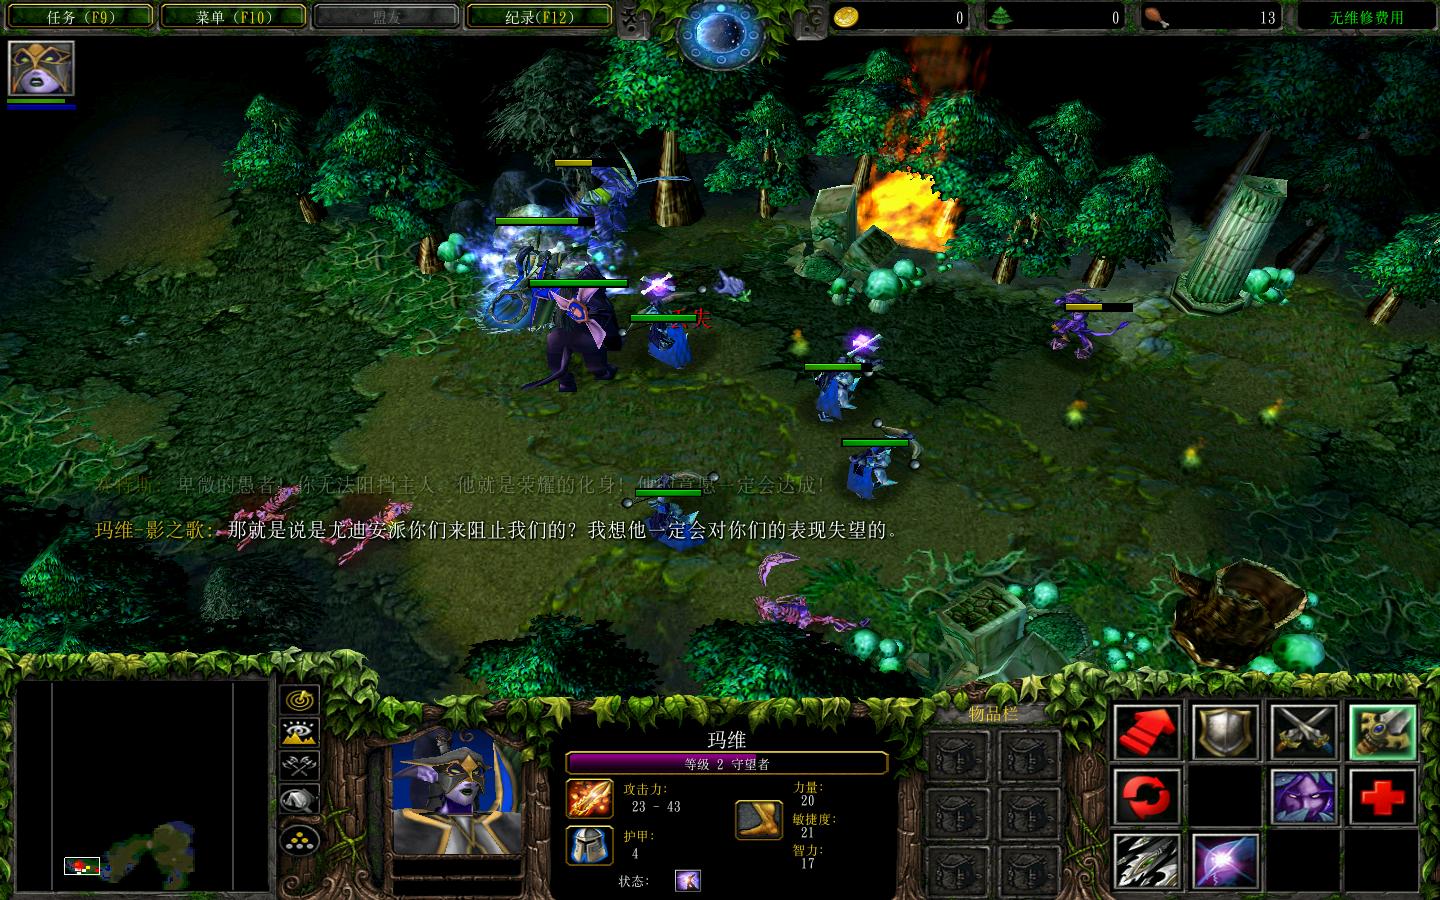 ħ3Warcraft III The Frozen Thronev1.24-1.27IV֮5.9ʽ